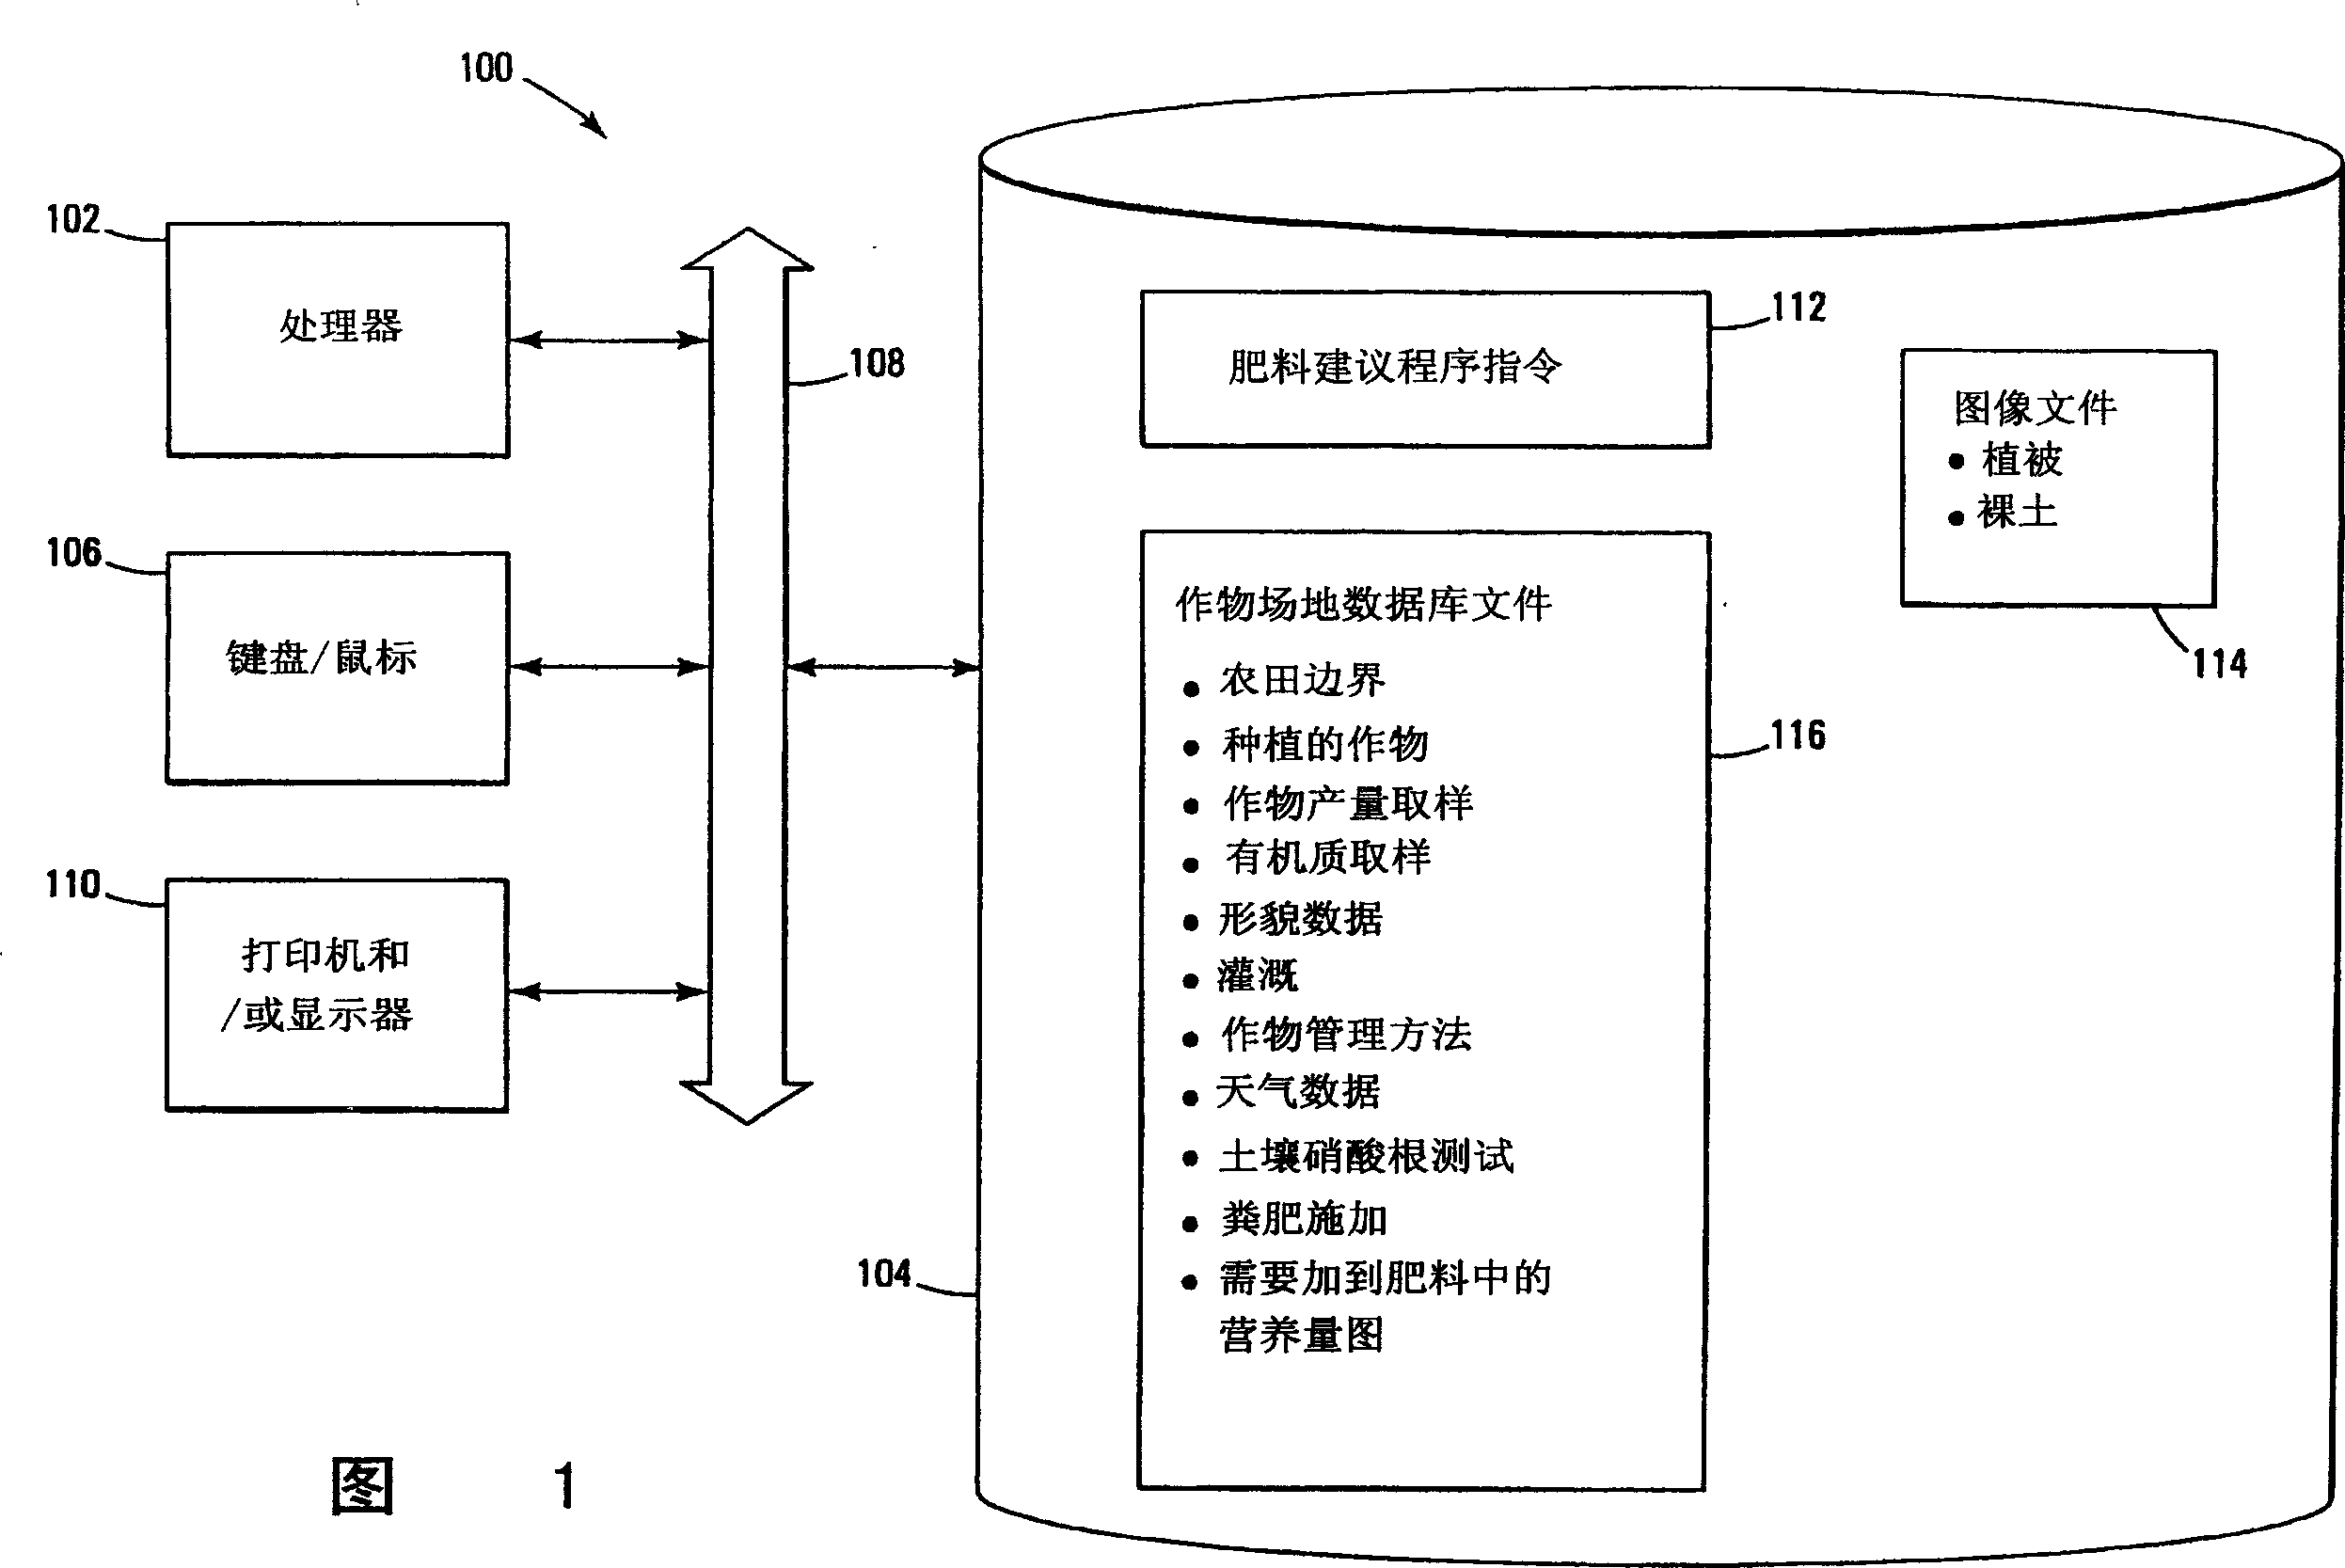 Computer specified fertilizer application for agricultural fields